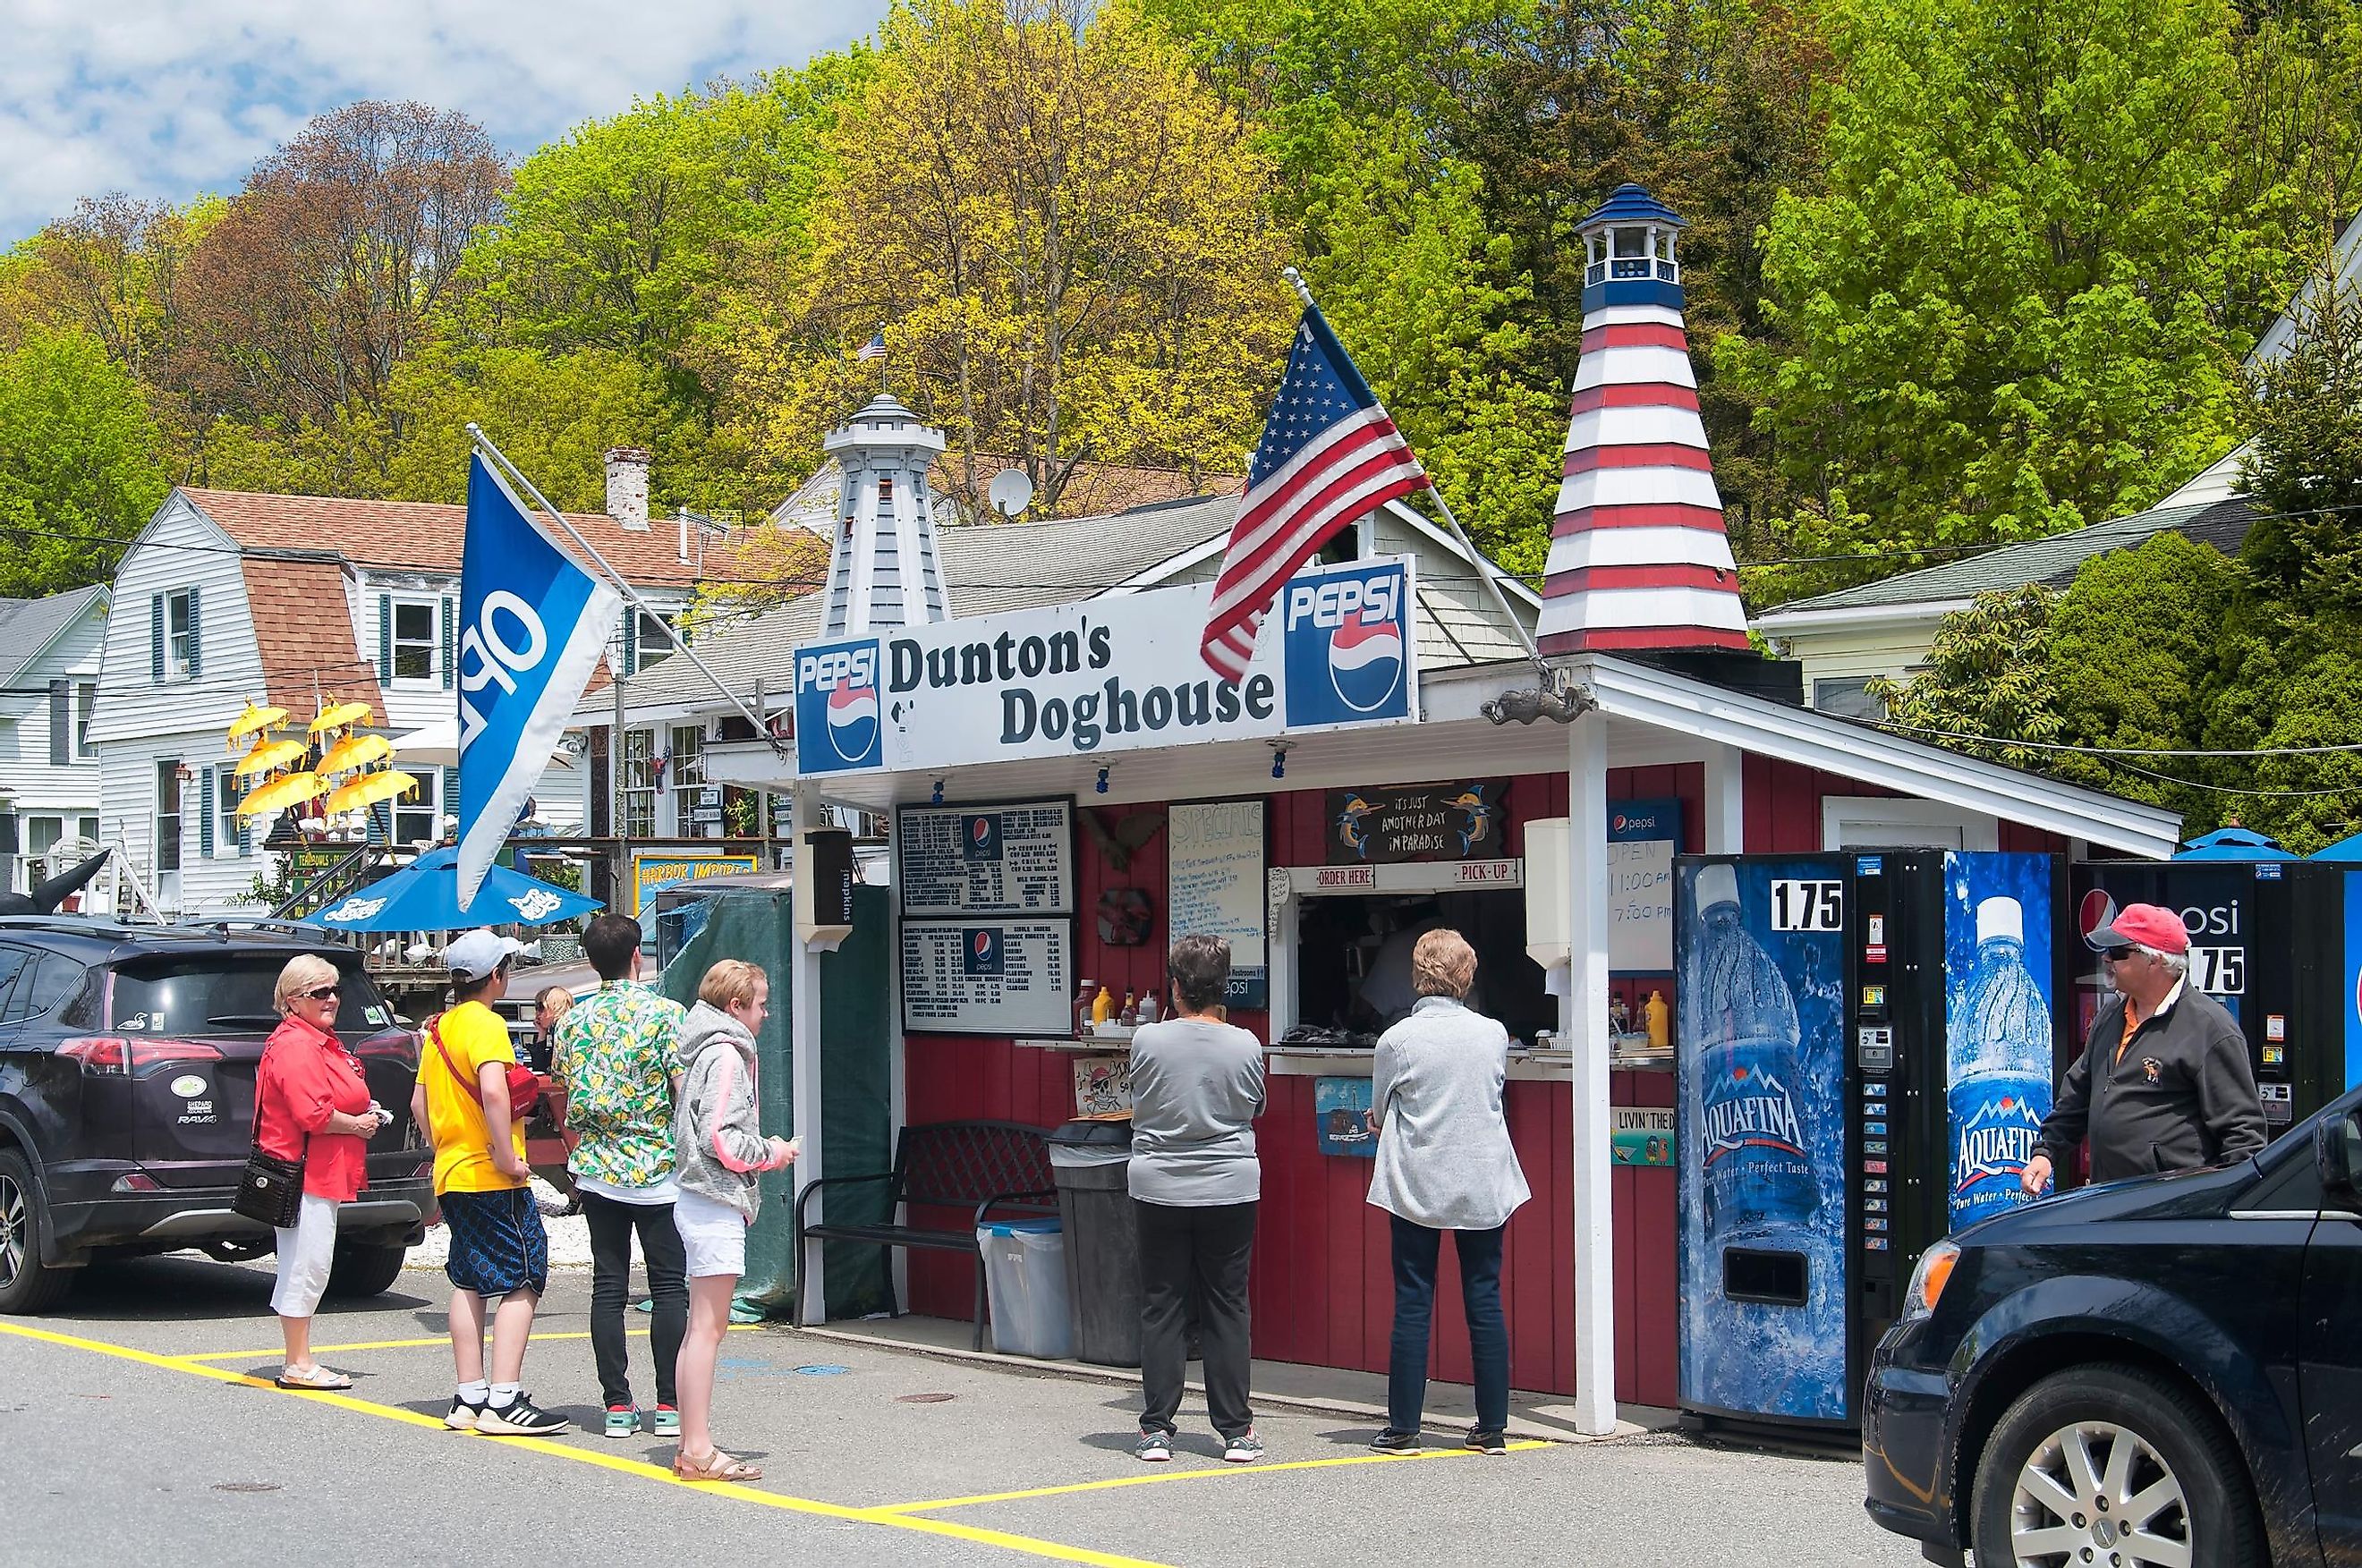 People lined up outside of Dunton's Doghouse hot dog stand in the town of Boothbay Harbor Maine.